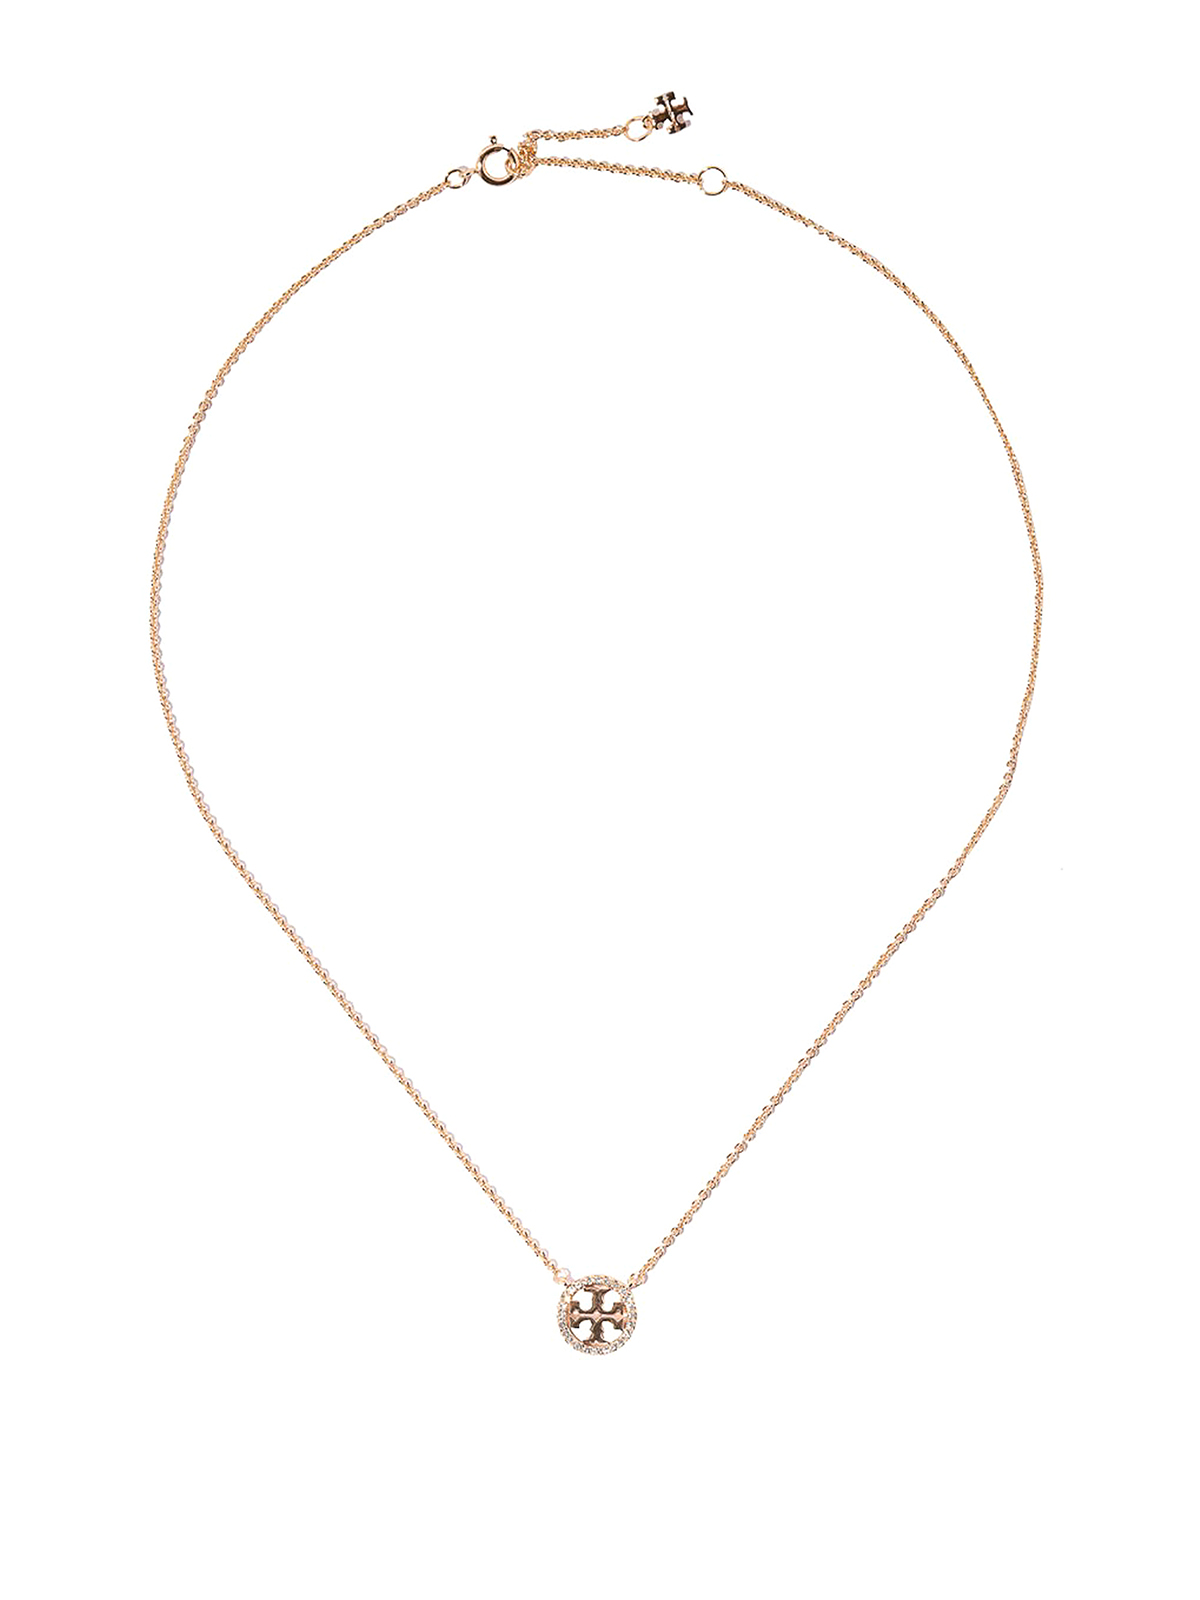 Necklaces & Chokers Tory Burch - Gold tone necklace with charm and crystals  - 53420783